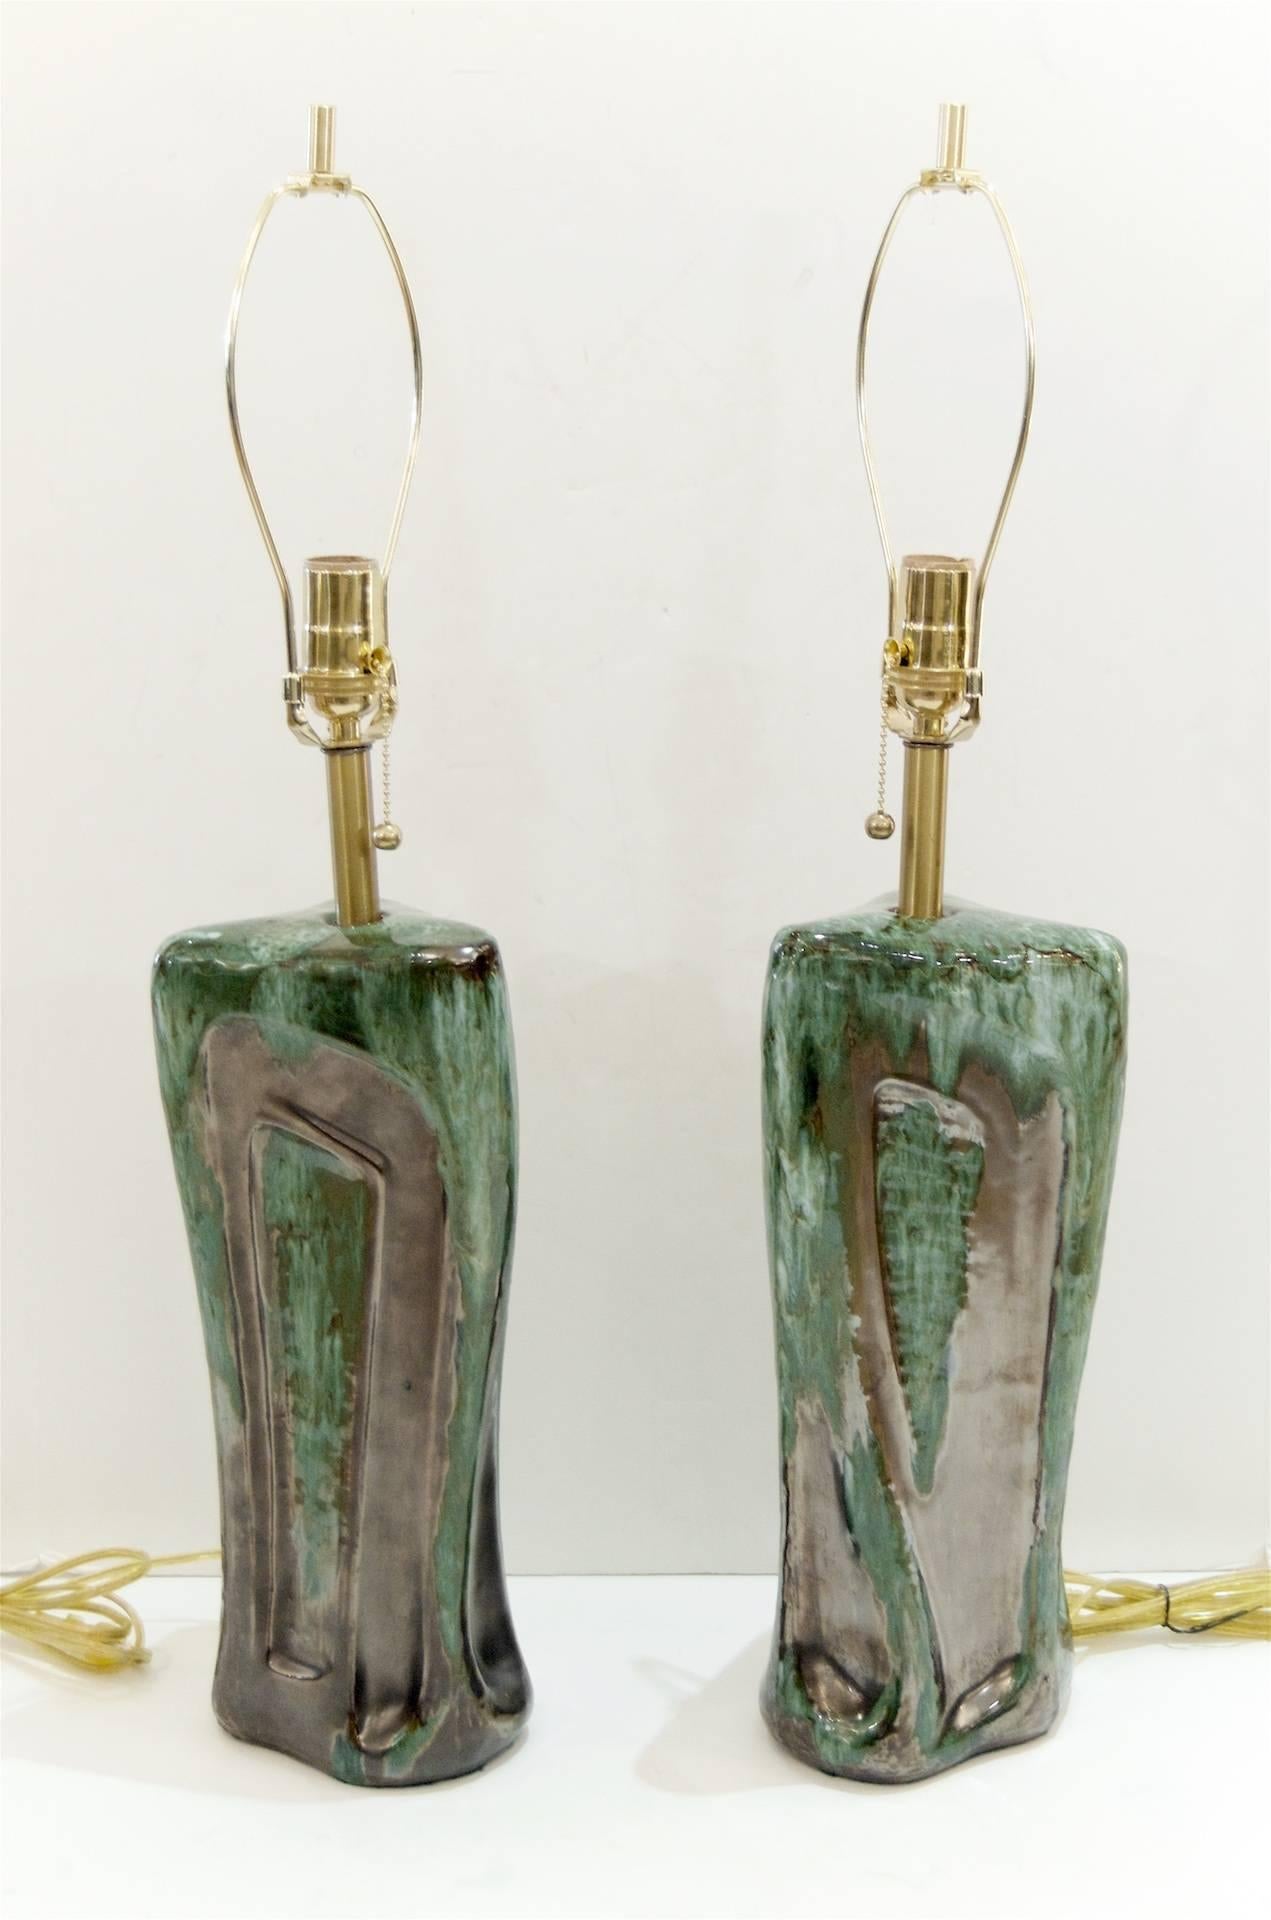 A pair of organic form glazed table lamps by Sheldon Gants for Kroywen Ceramics. The green glaze has a malachite like texture and the graphite has an iridescent appearance. 

Takes one medium base bulb up to 100 watts. New wiring.

Height listed